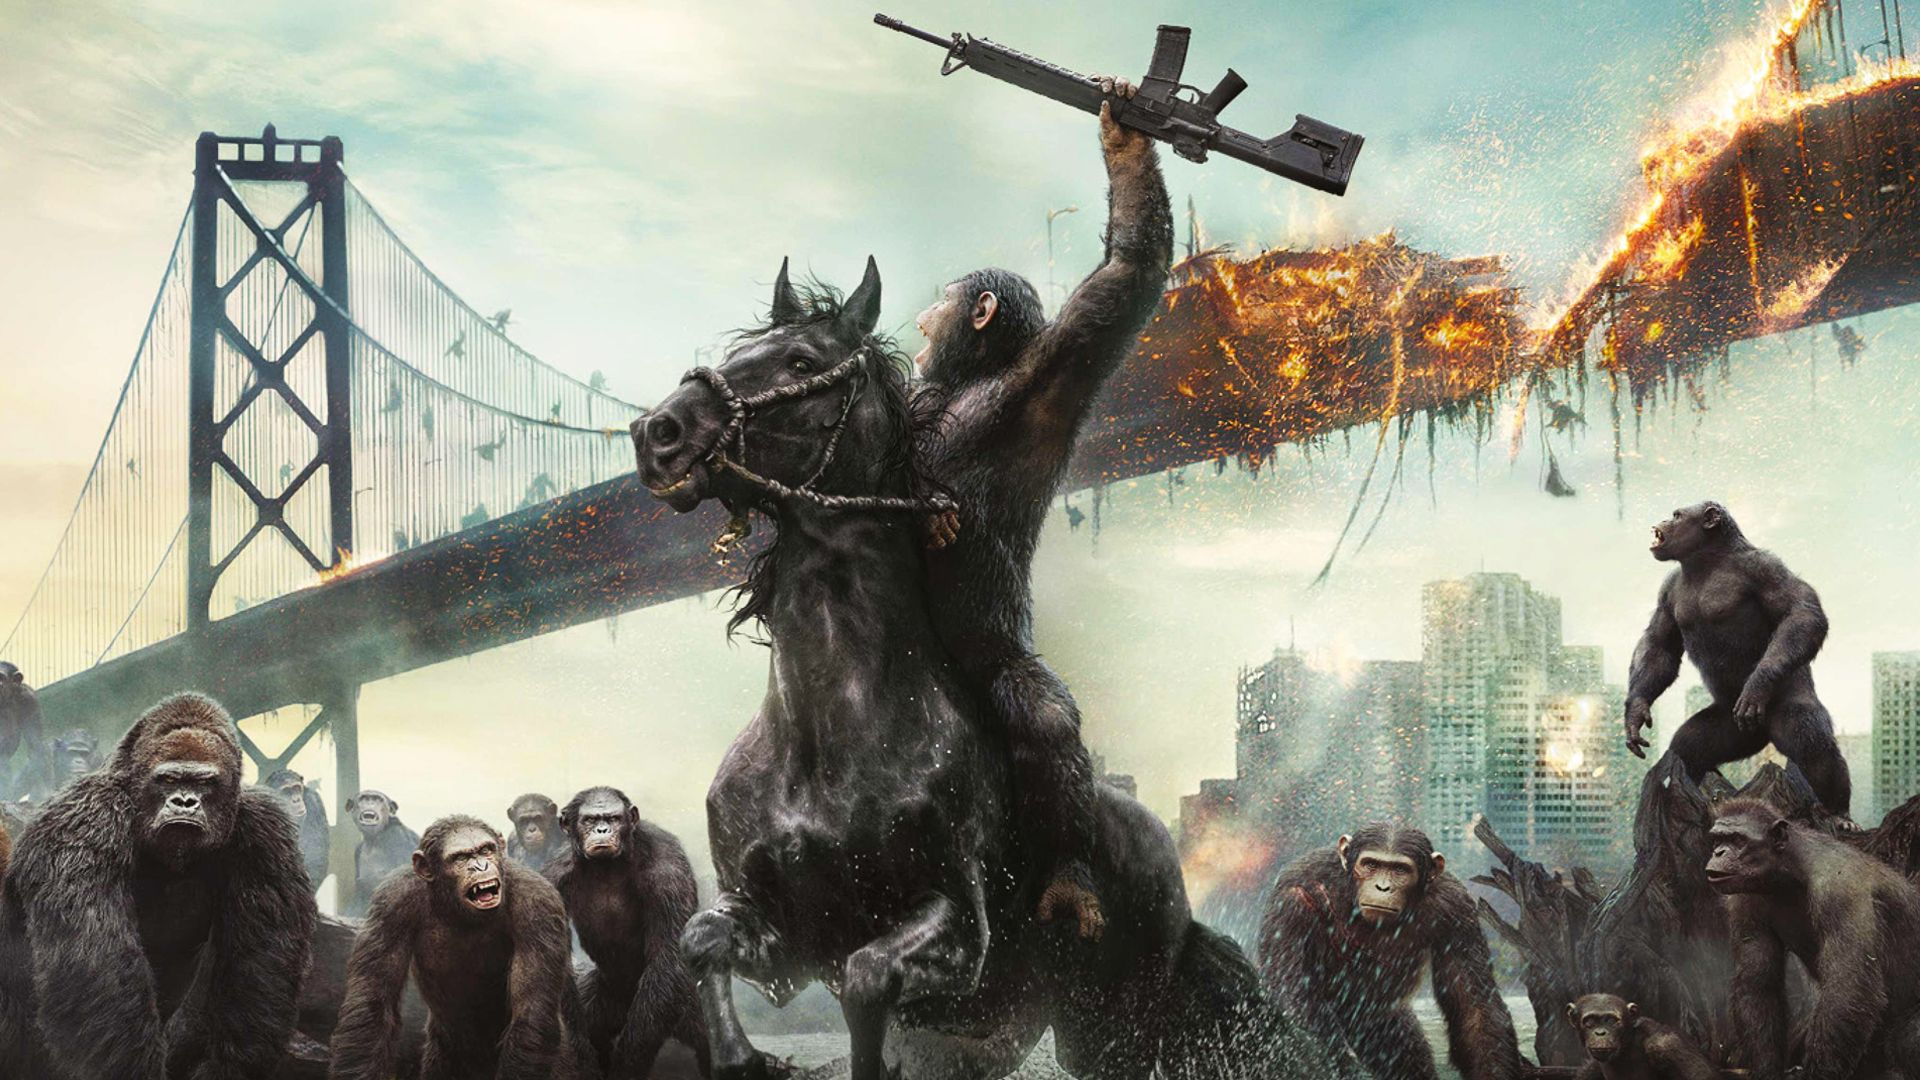 Official Plot Summary of WAR FOR THE PLANET OF THE APES Revealed